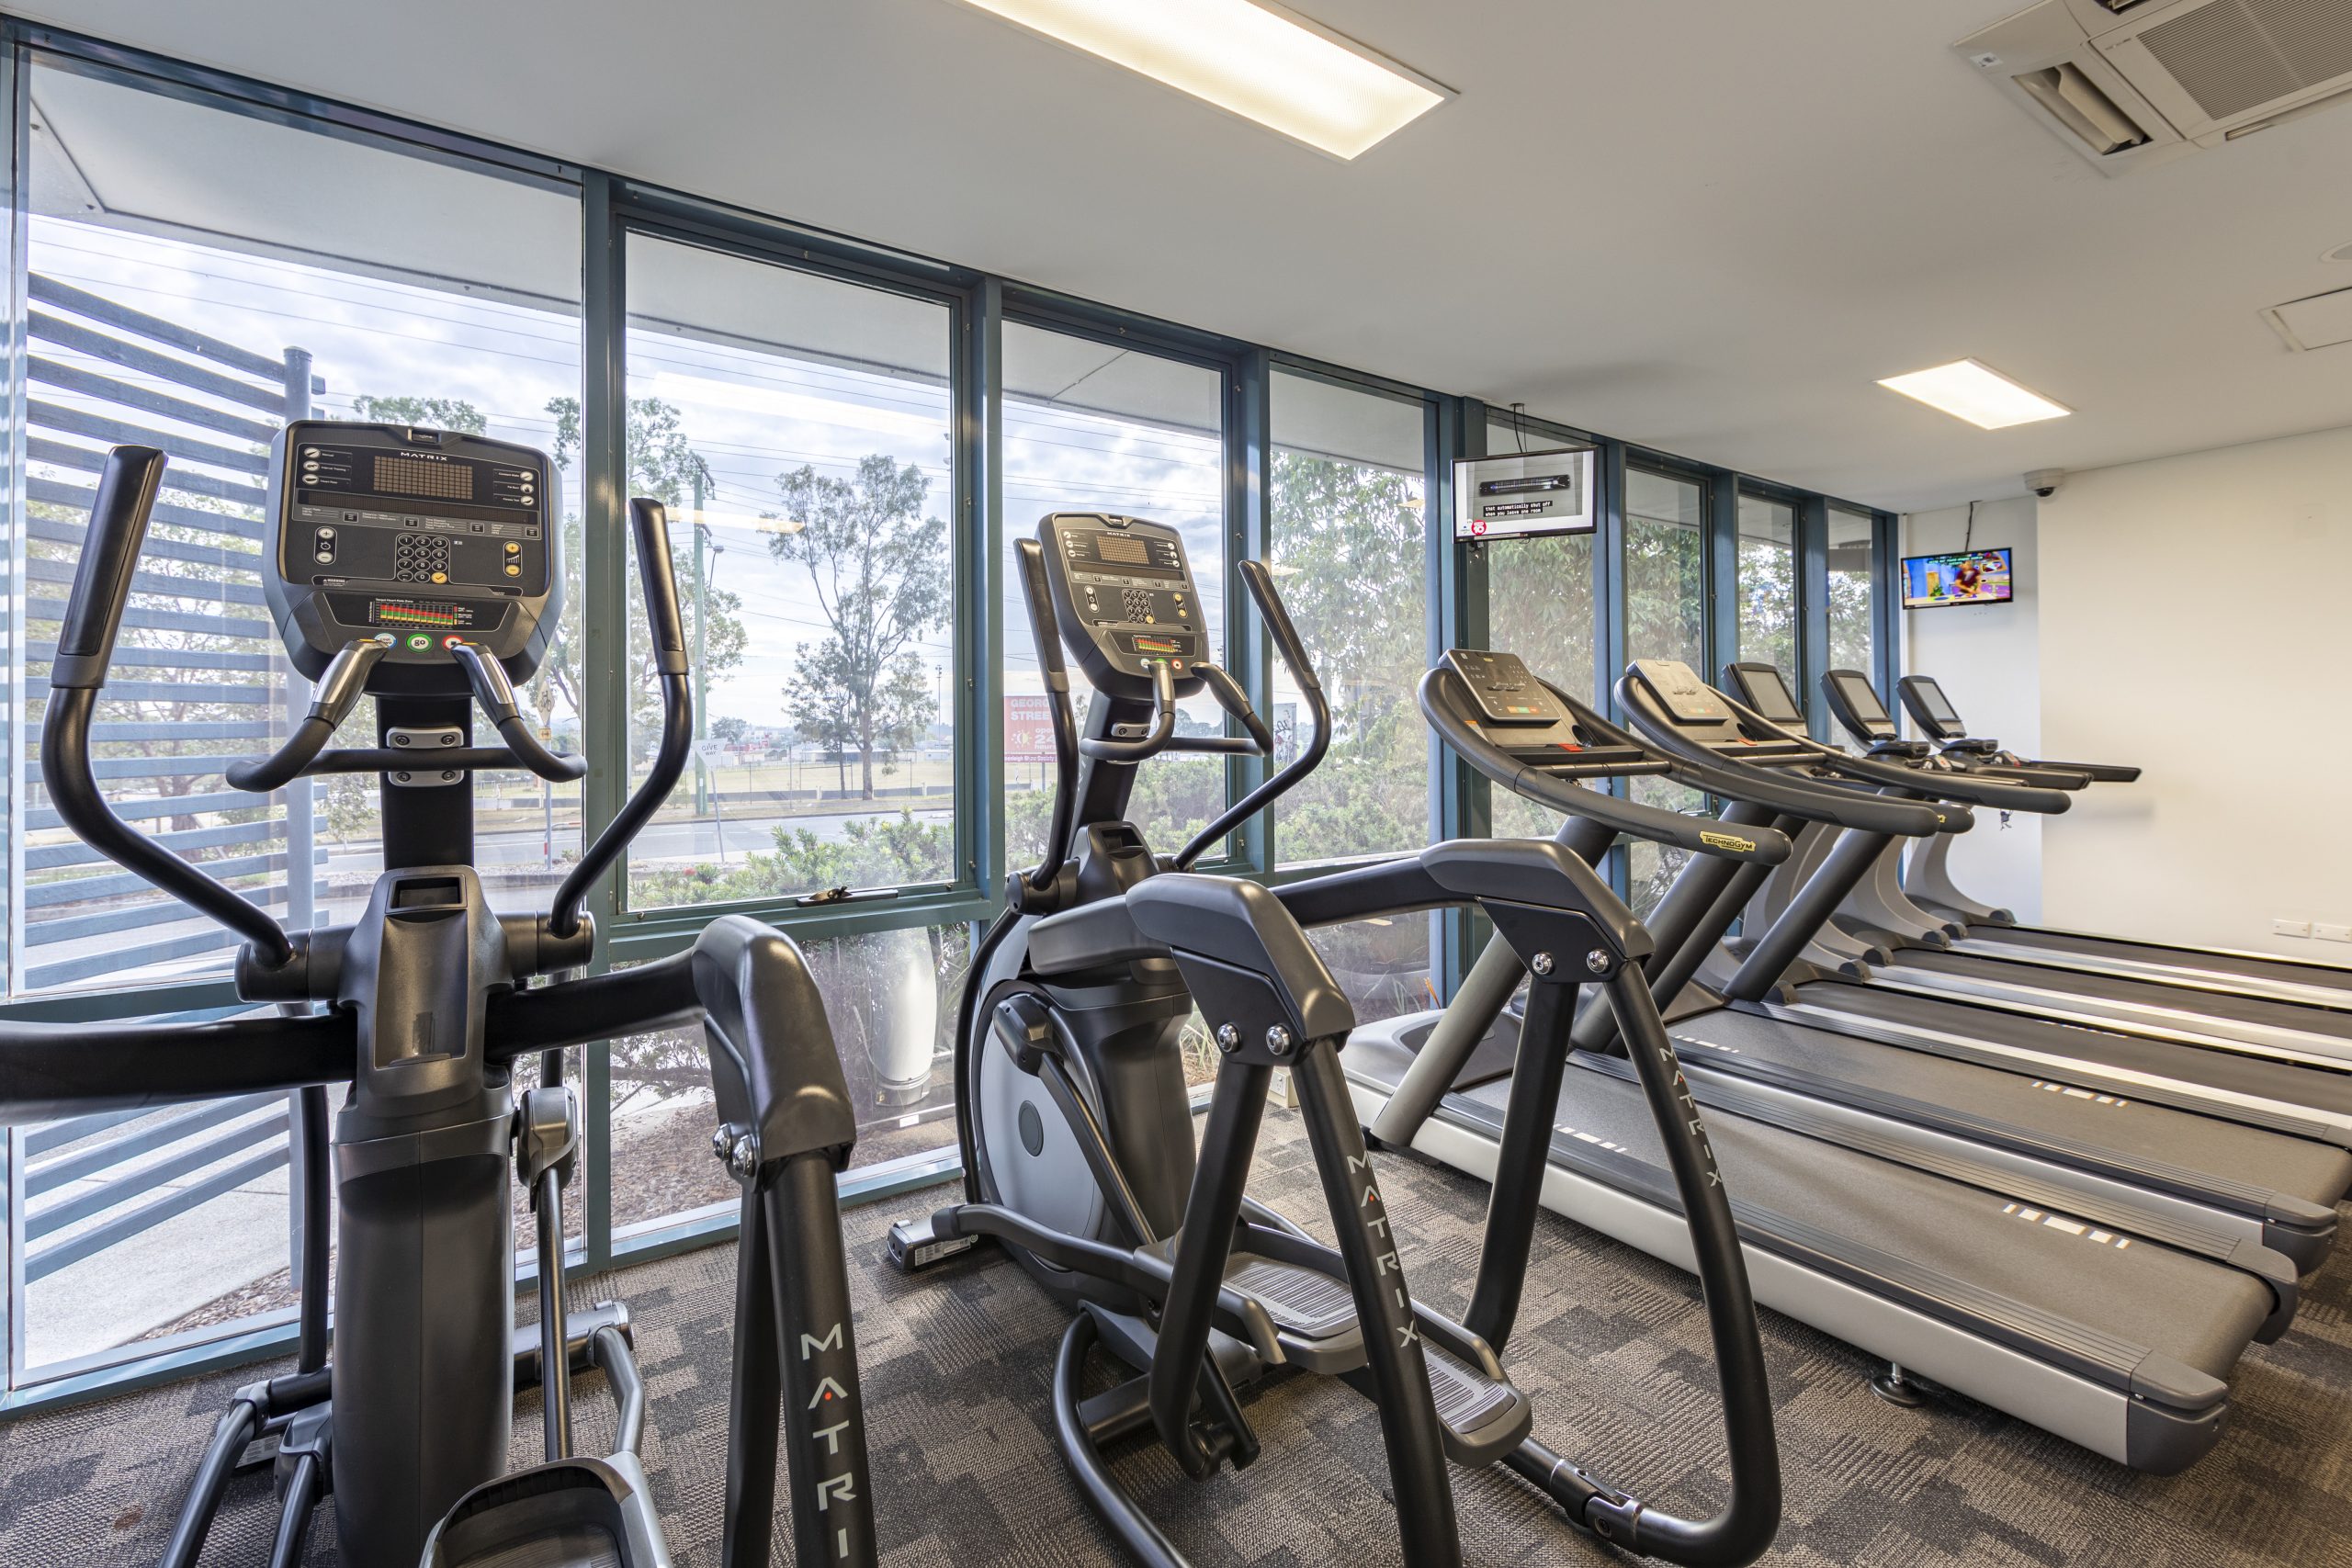 Treadmills lined up against windows in the cardio room at Mount Warren Fitness Centre